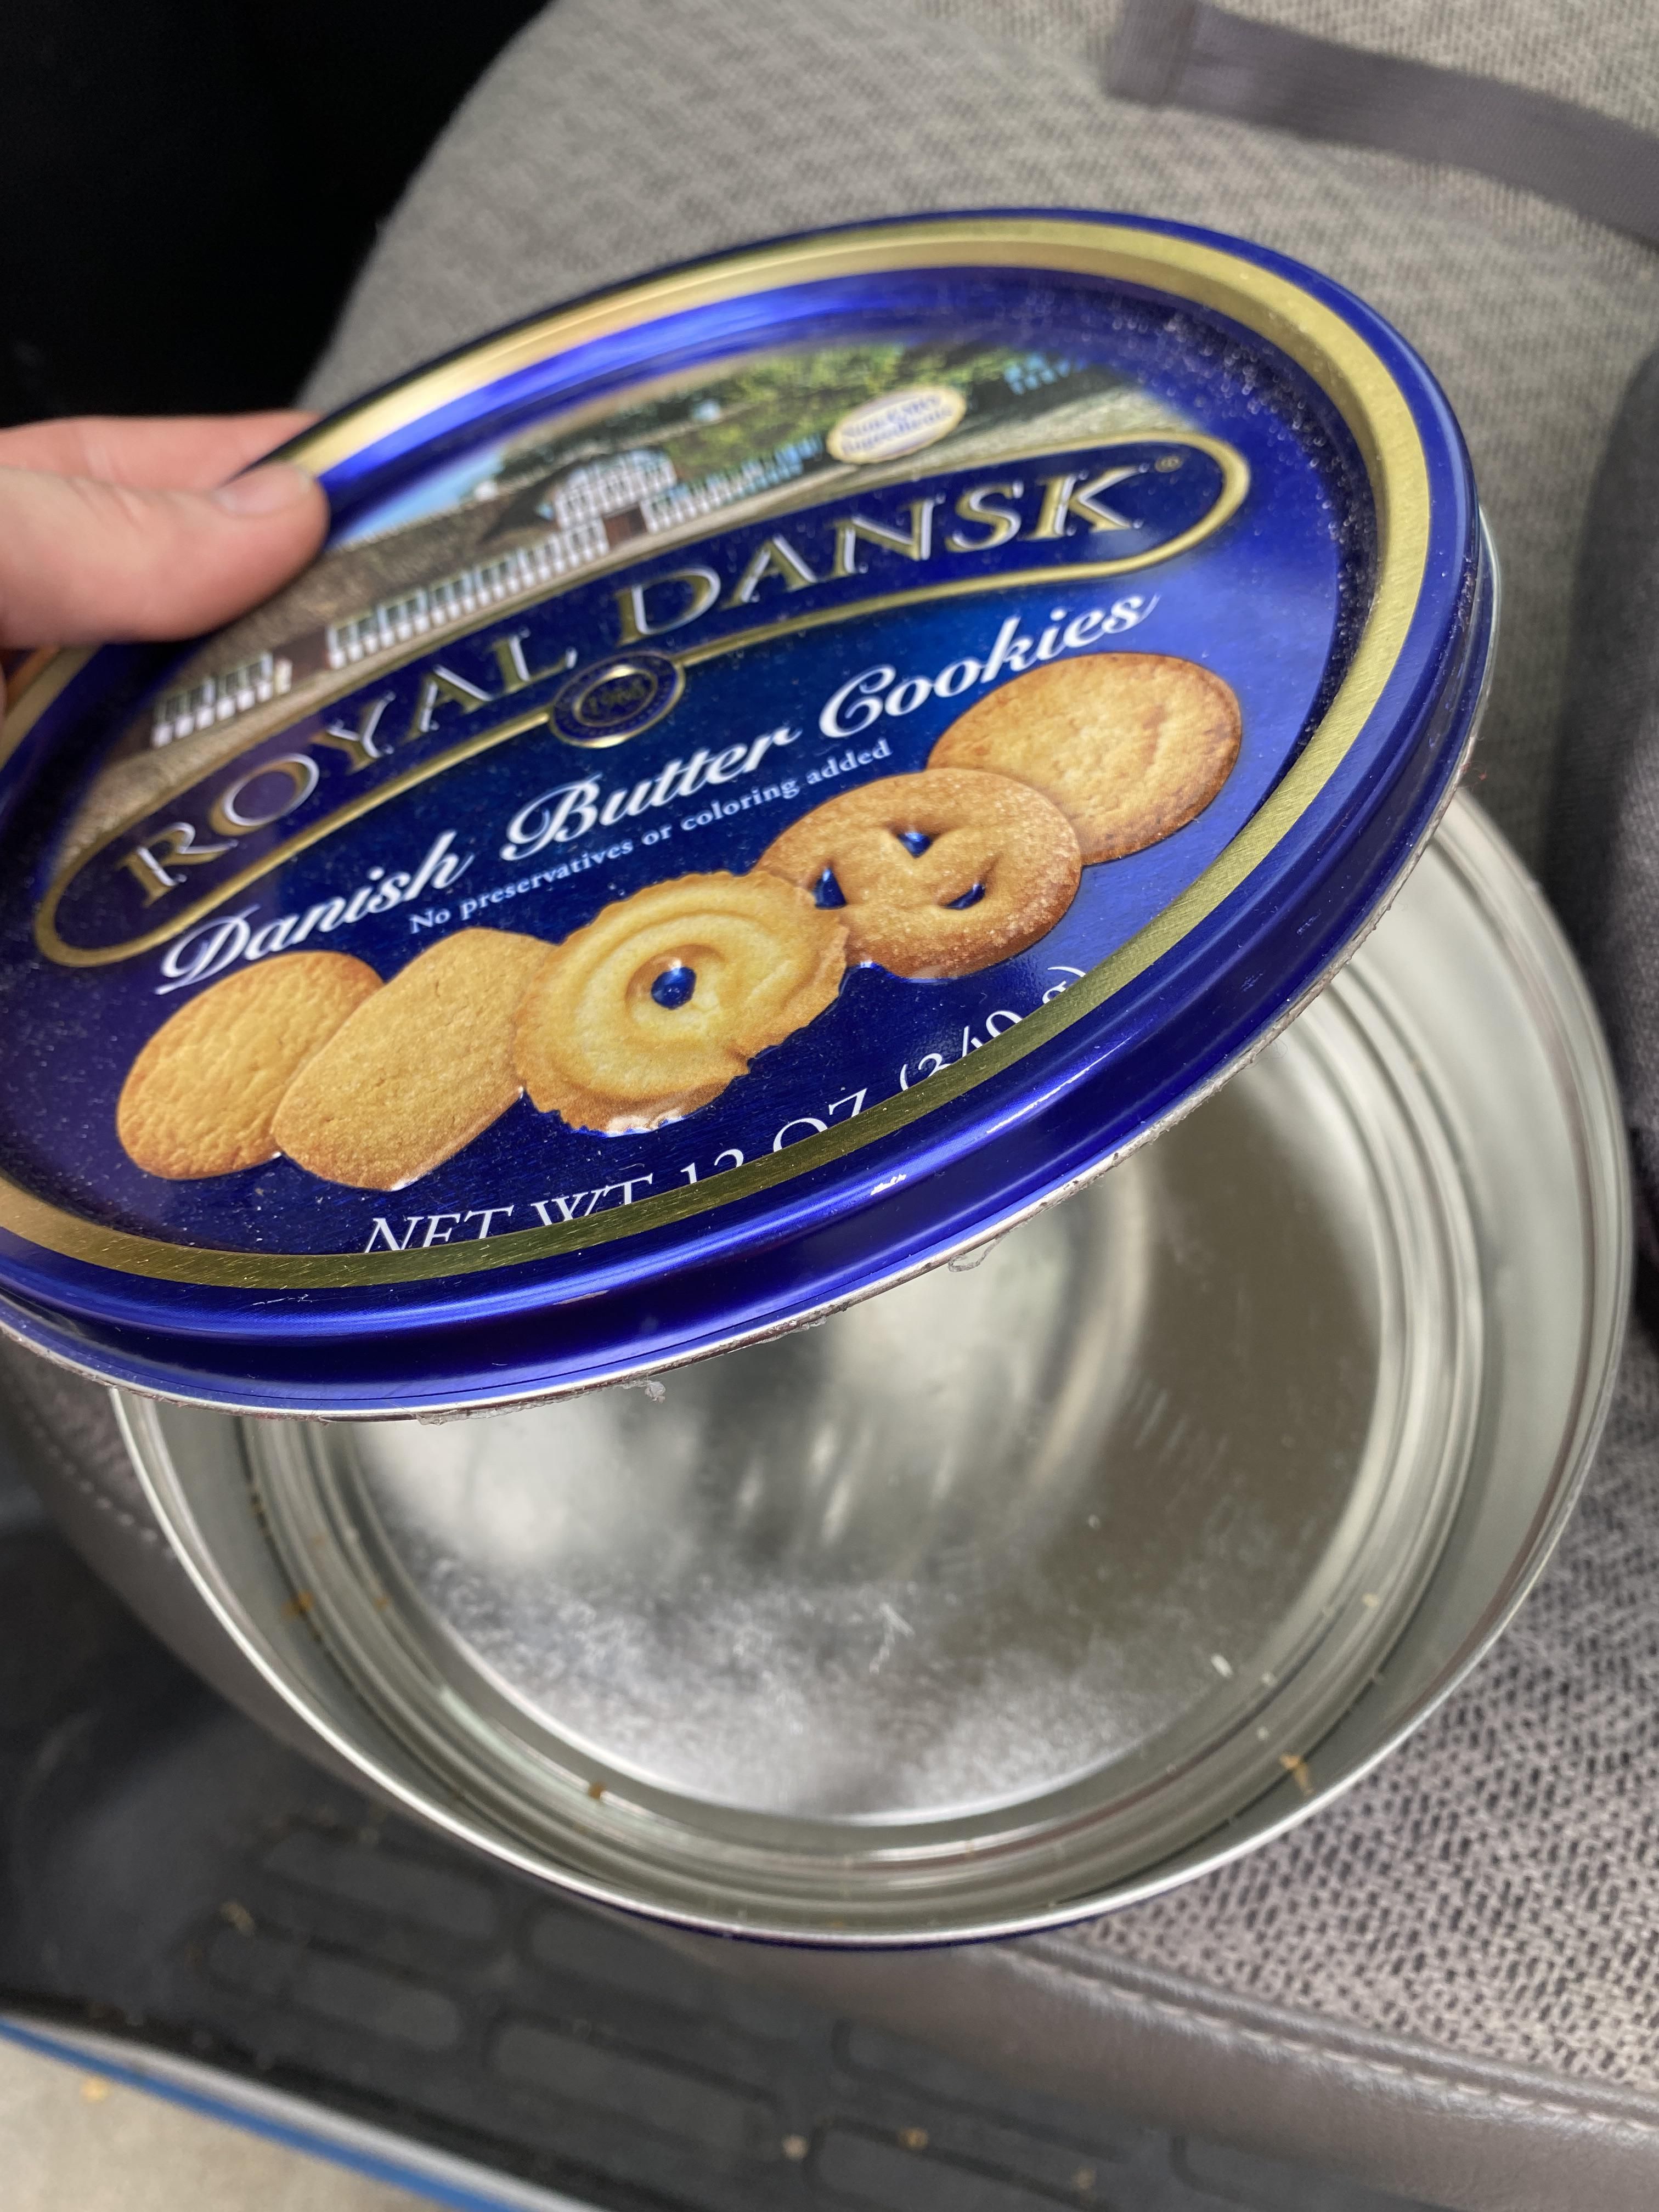 I don’t know how I found one with cookies in it, but they’re gone now. What do I do with this? It feels illegal to throw these away…